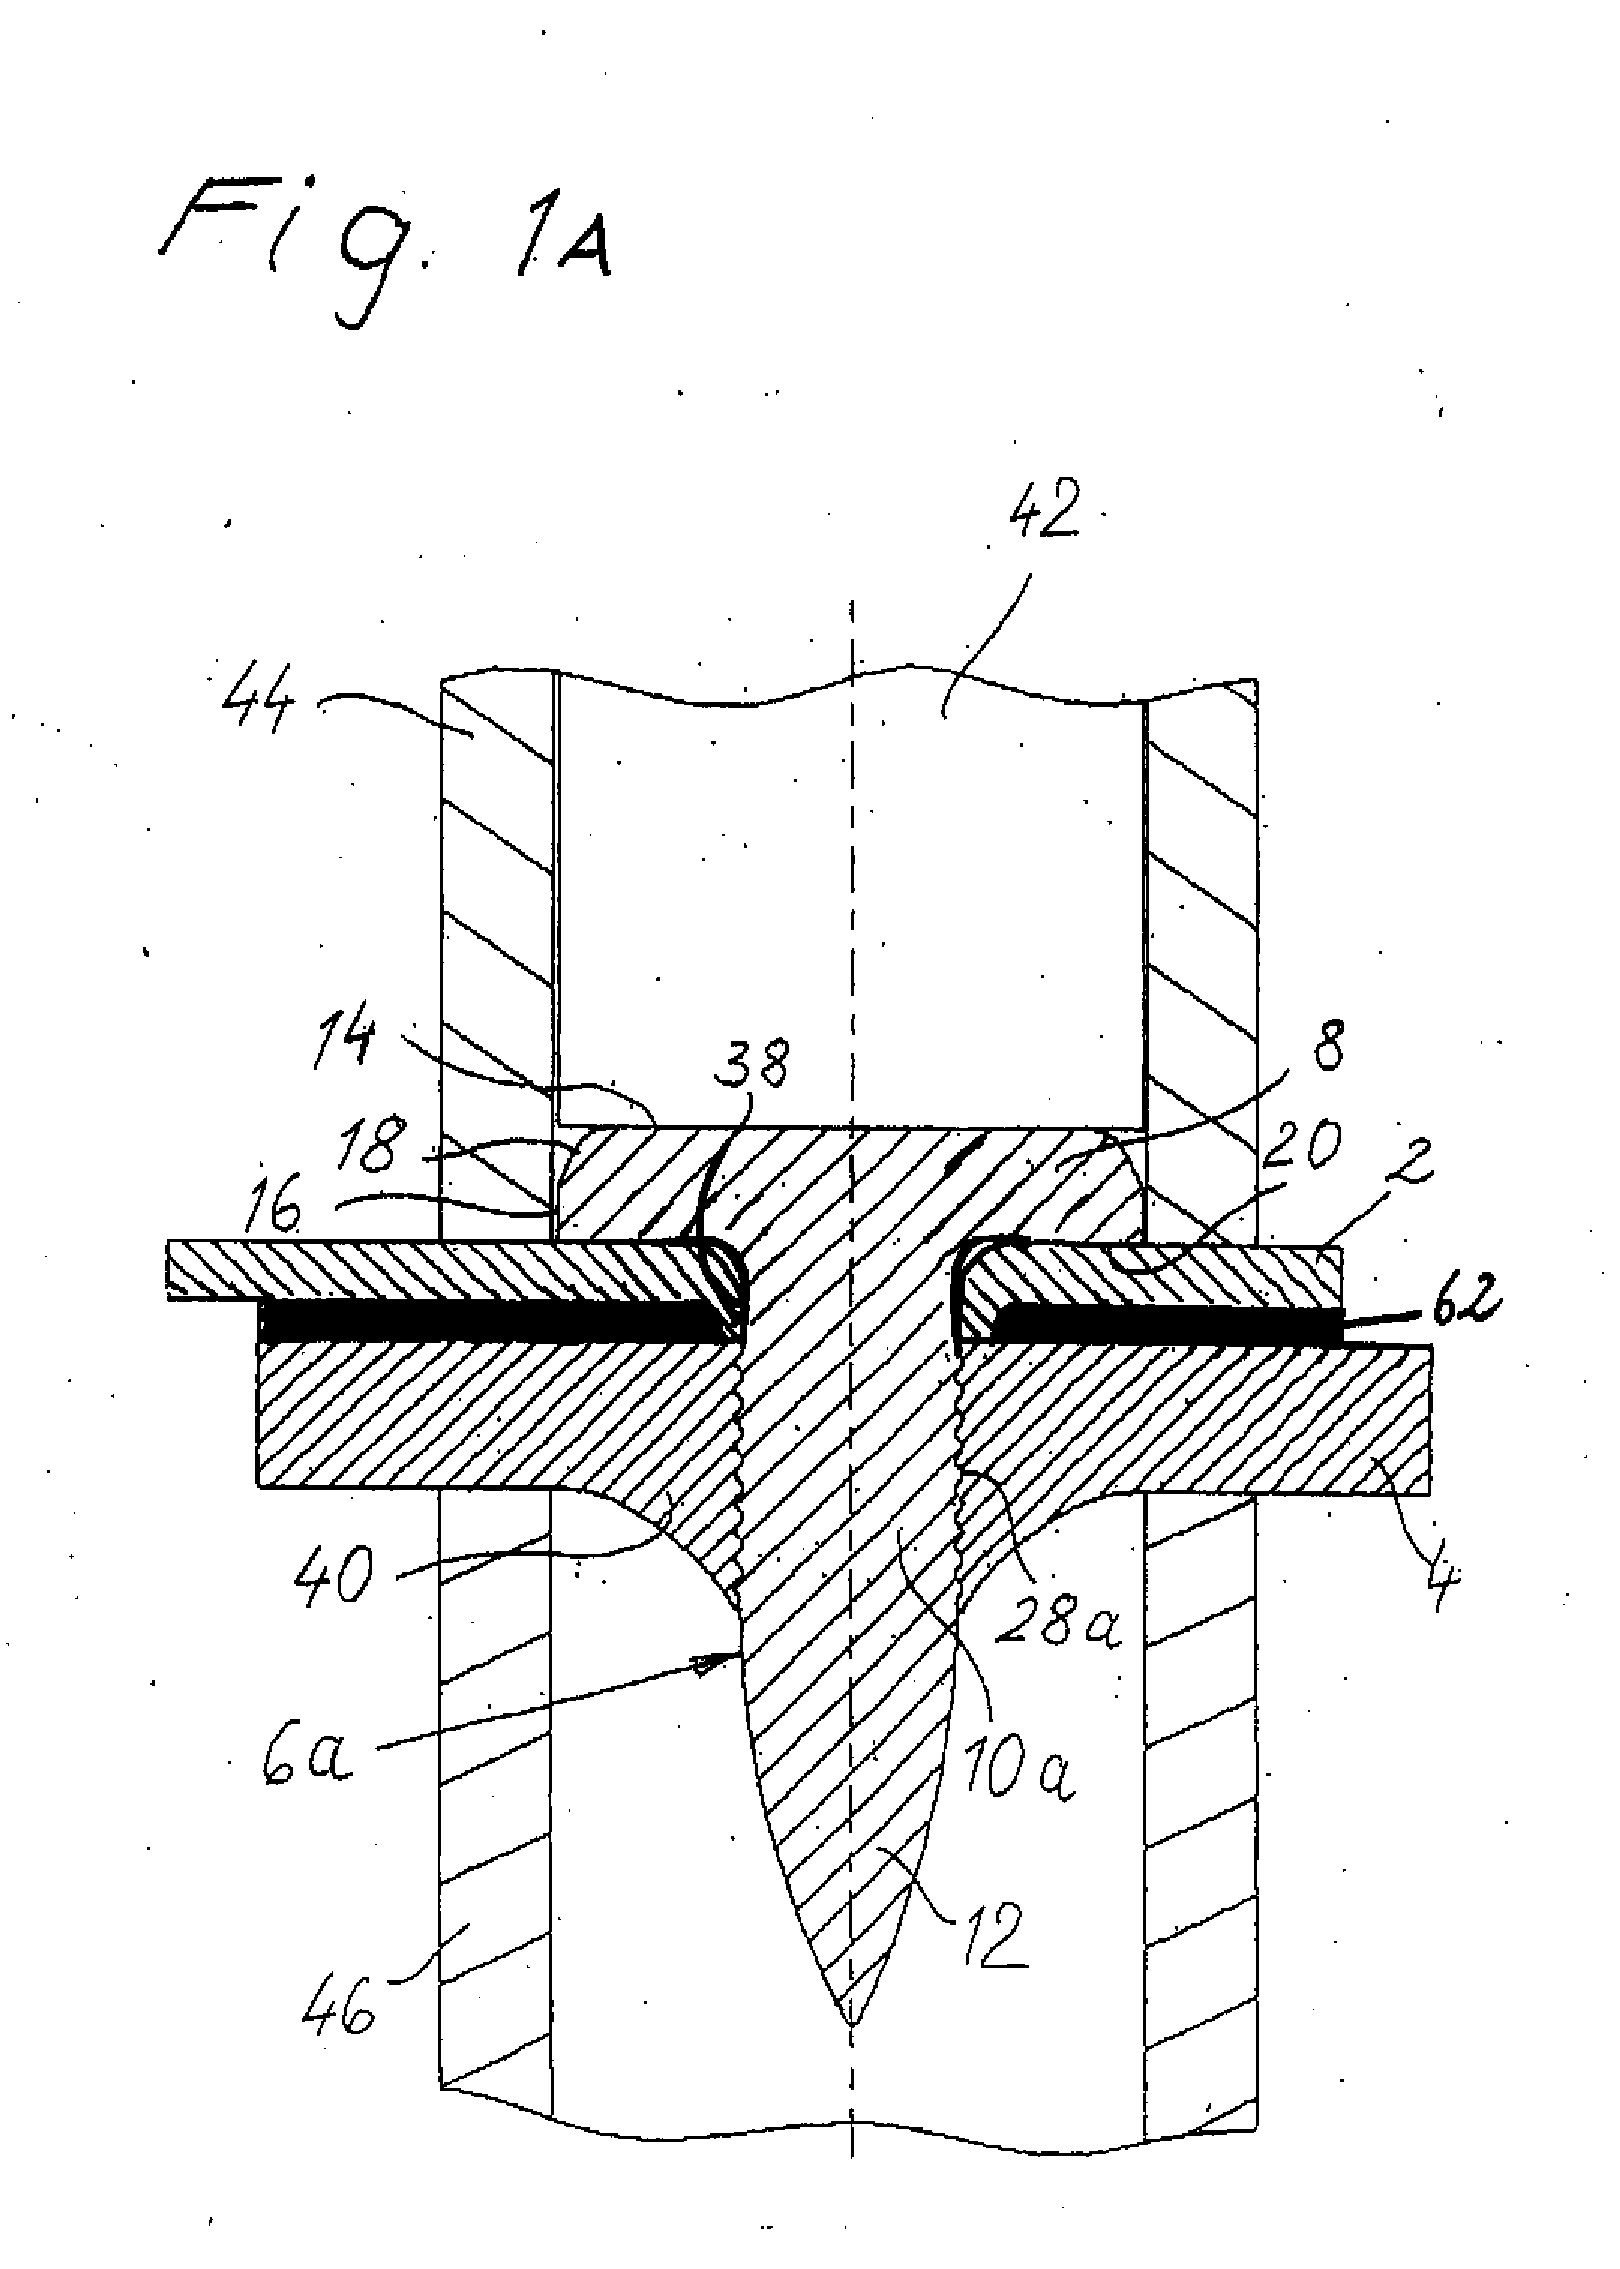 Method for Establishing a Nail Connection and a Nail for This Purpose